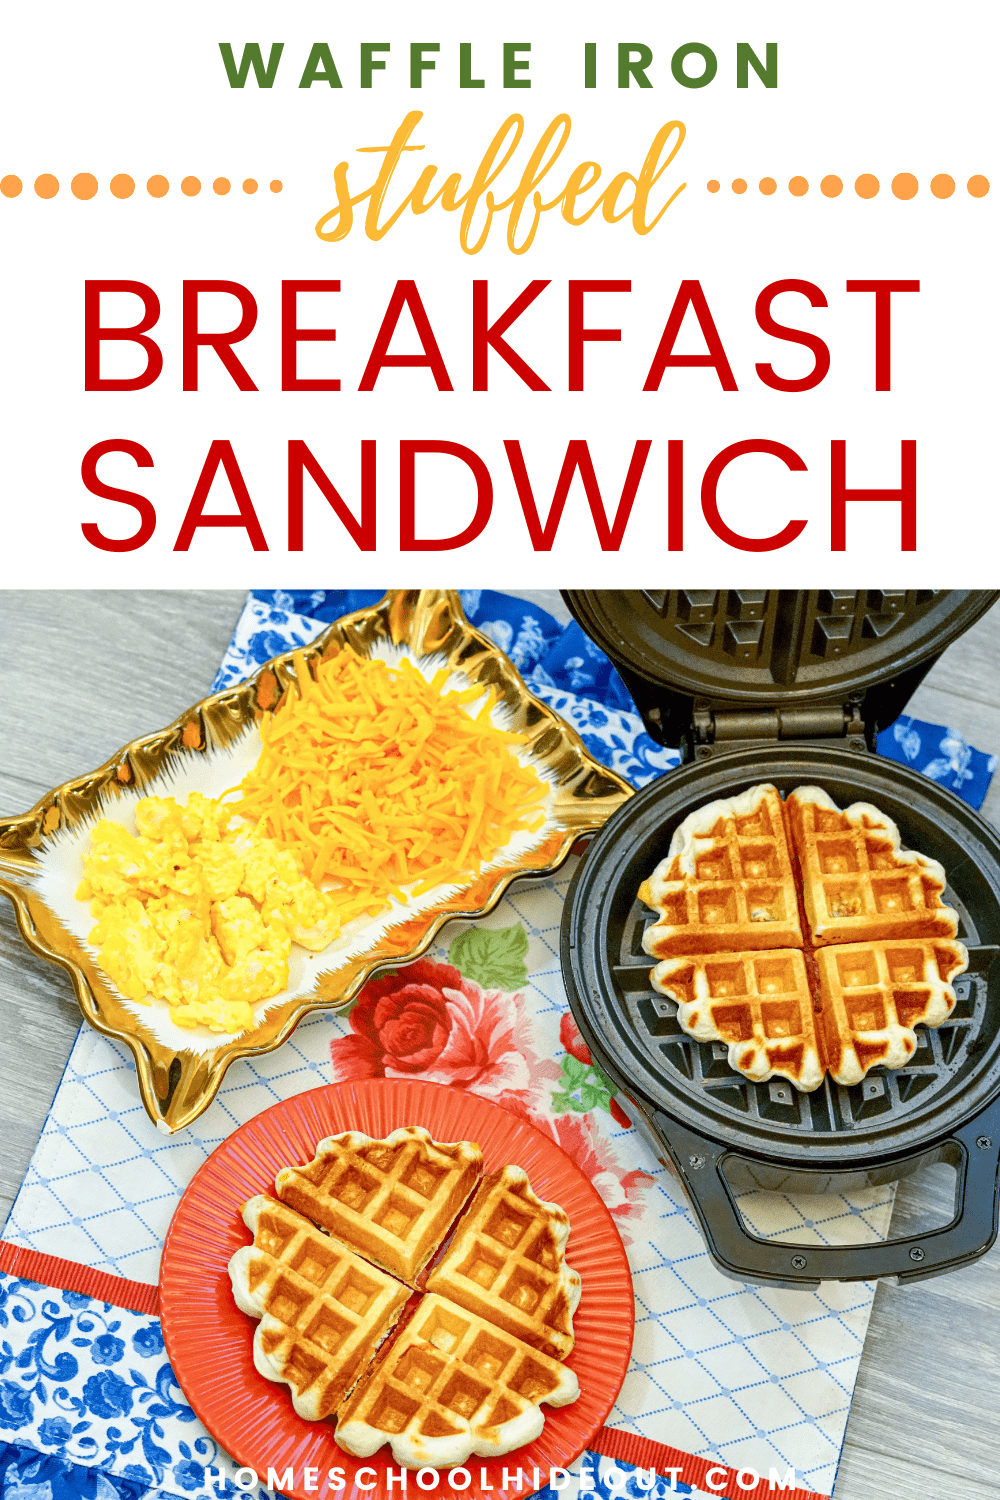 This stuffed breakfast sandwich just gave our mornings a new twist! Kids love them and I love how simple they are to whip up!